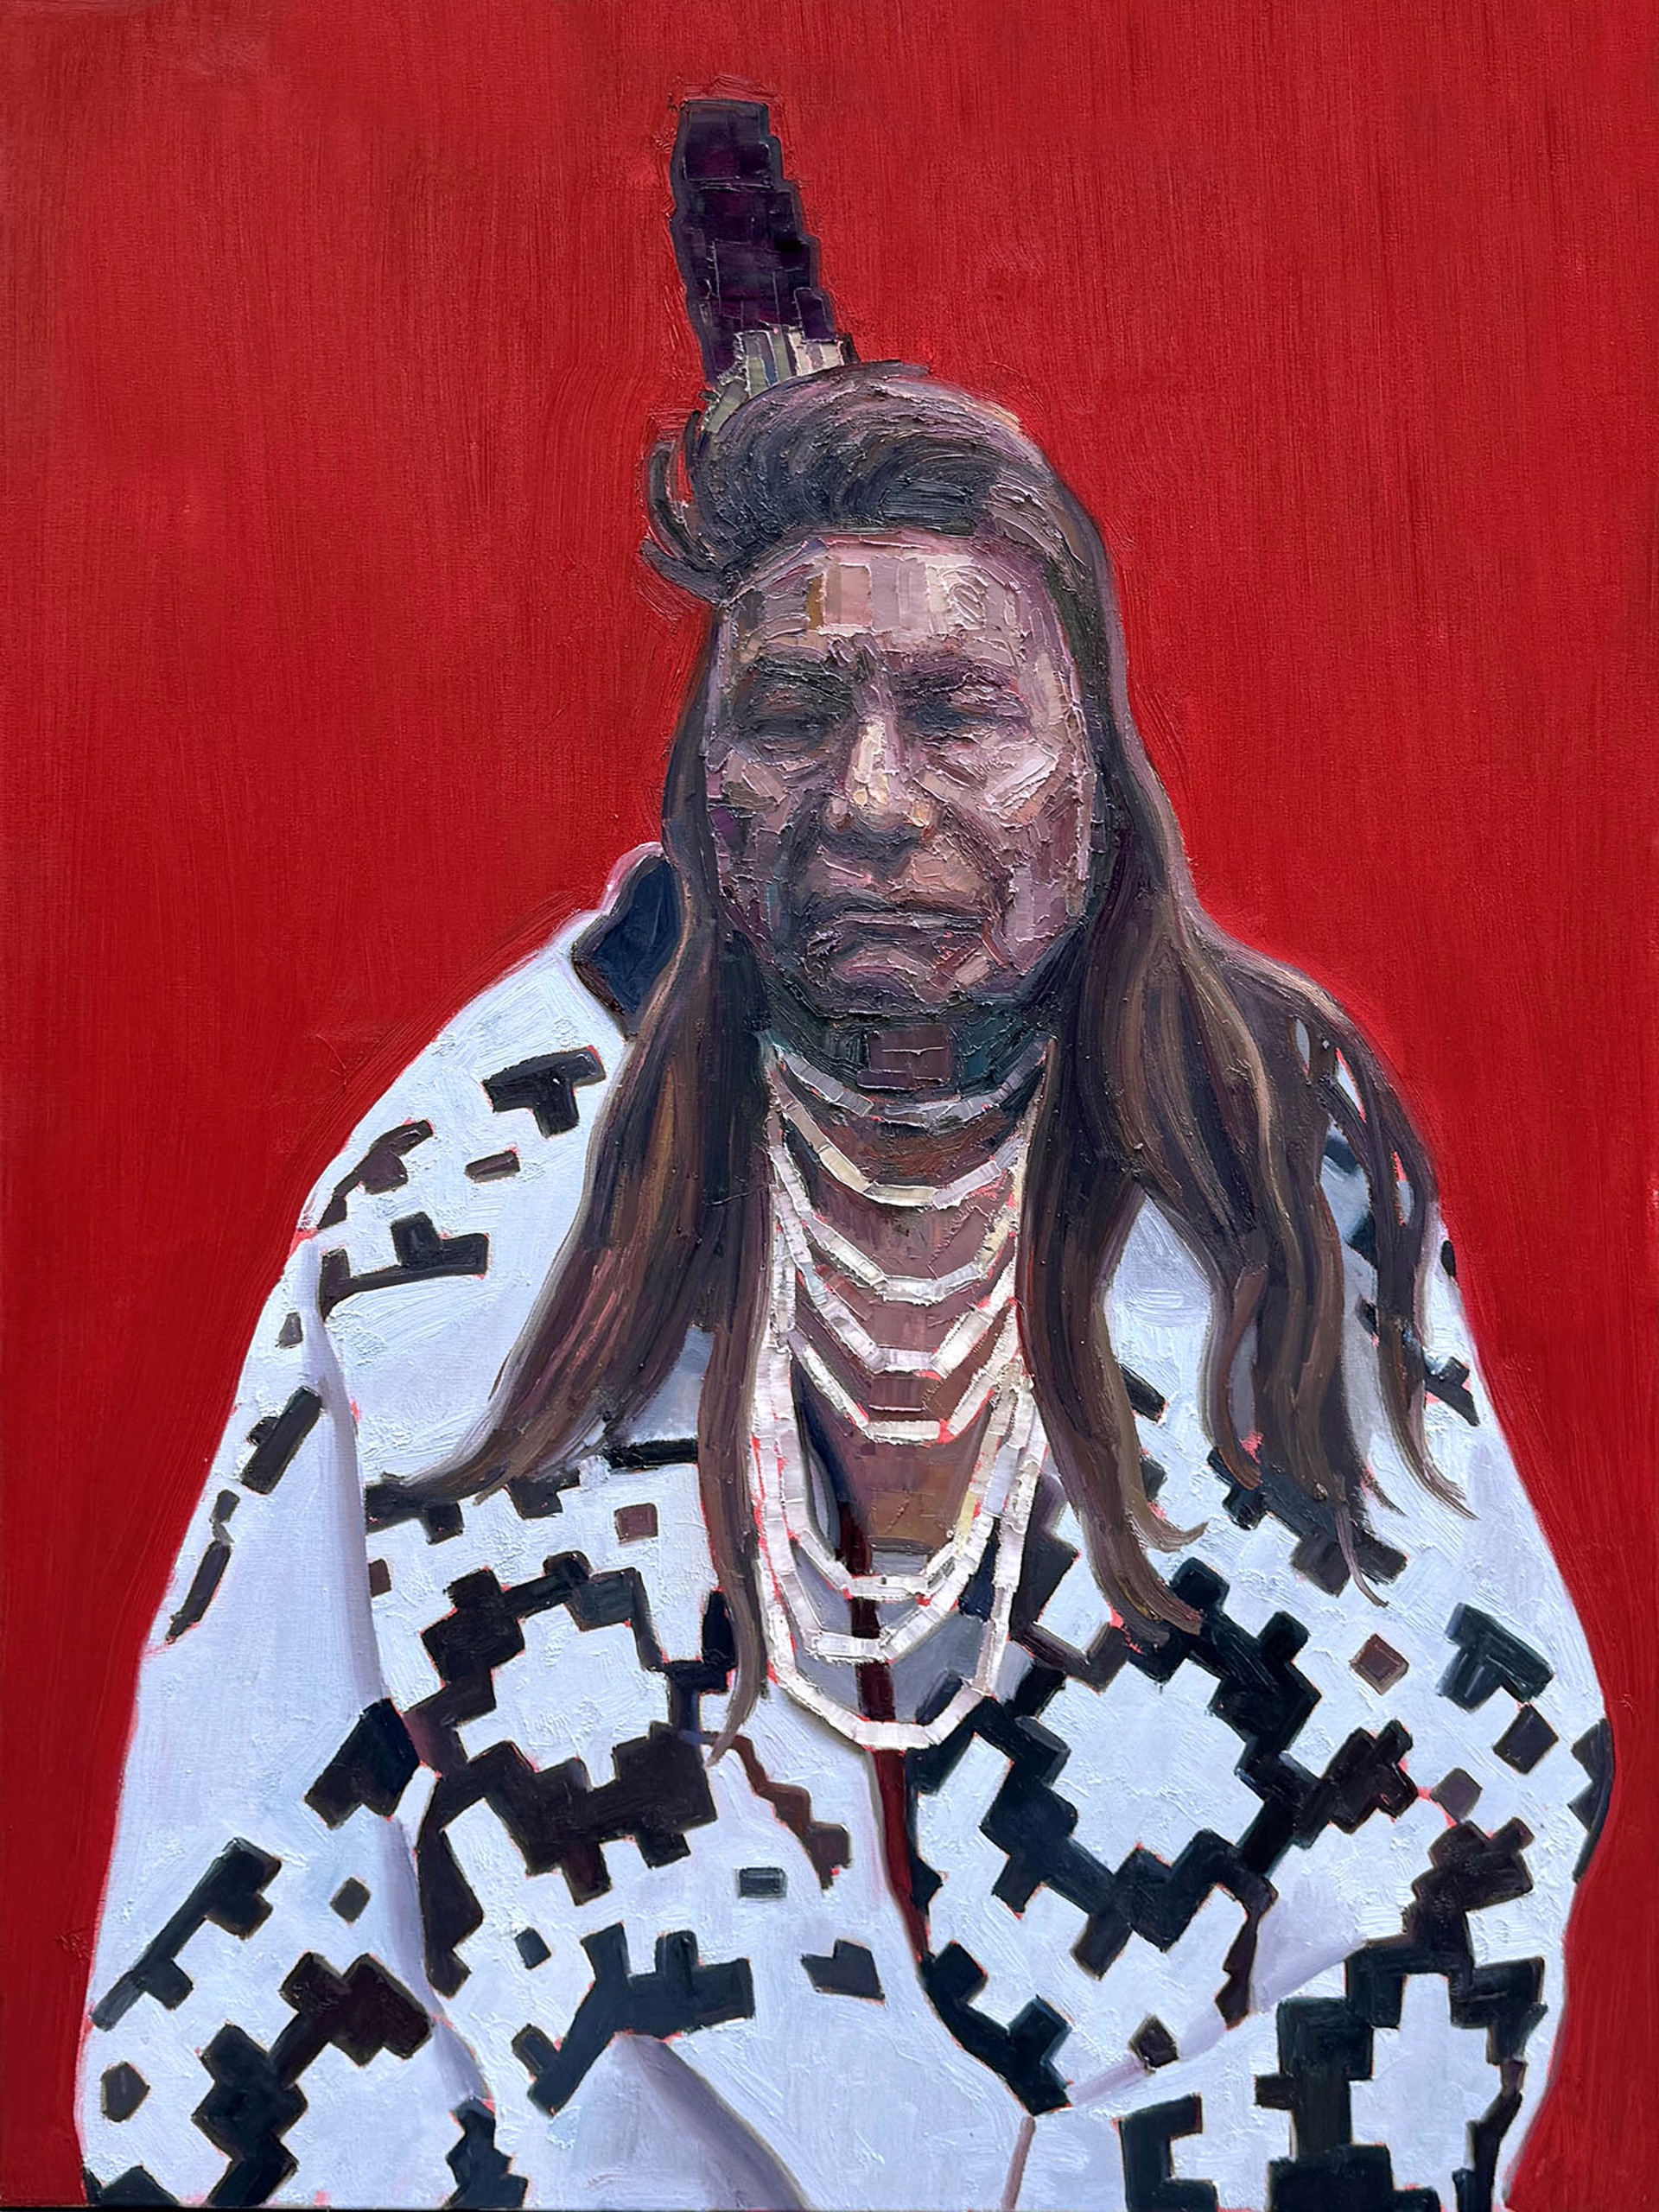 Original Oil Painting By Aaron Hazel Featuring Chief Joseph Figure Painting On Red Background